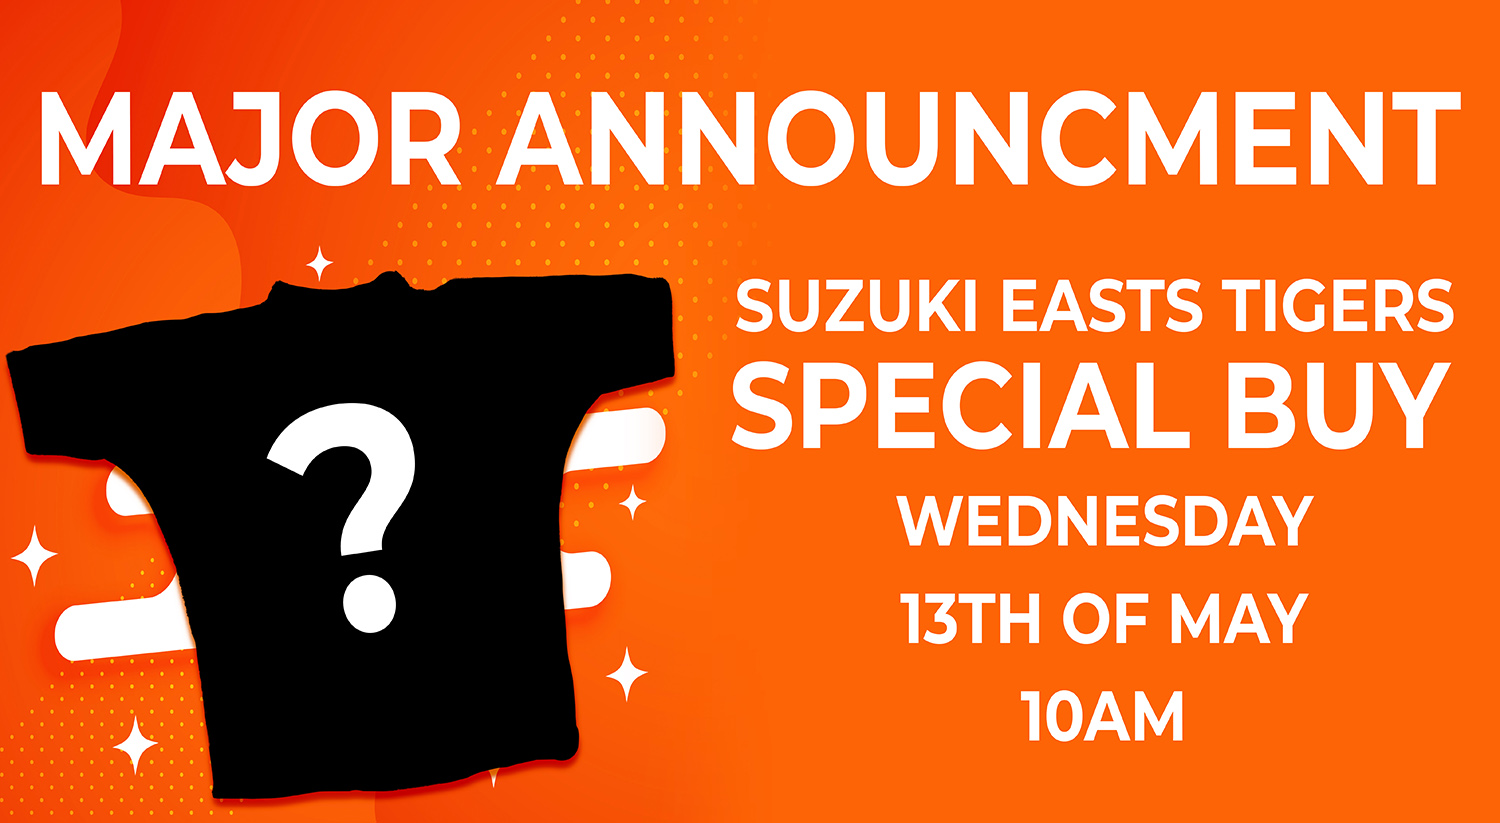 Major Announcement as Special Buys now available at Suzuki Easts Tigers